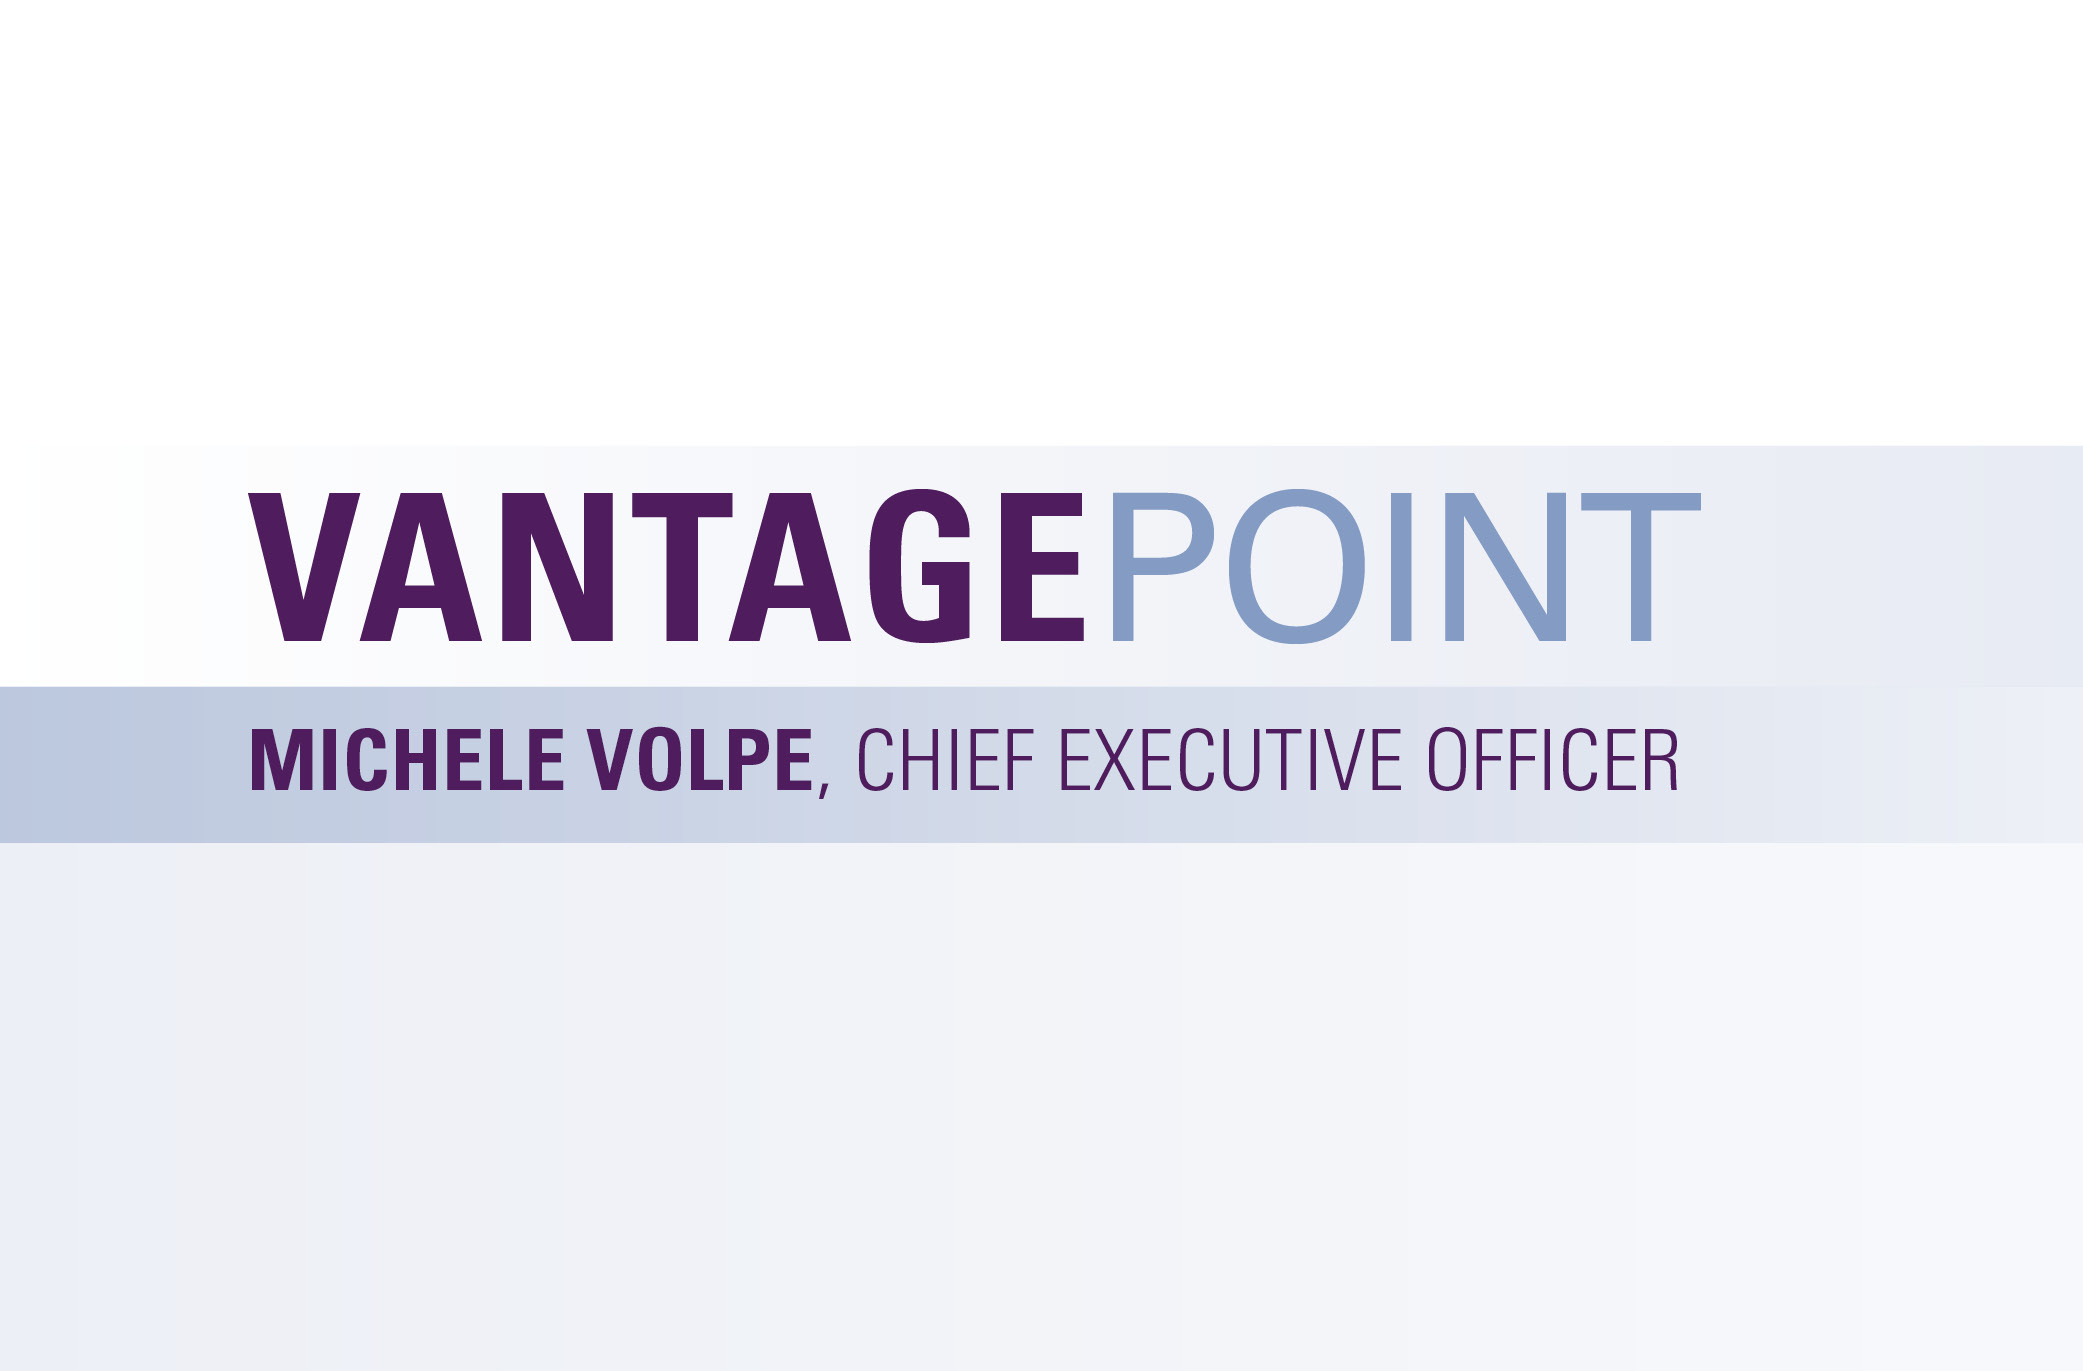 Vantage Point with Michele Volpe, Chief Executive Officer